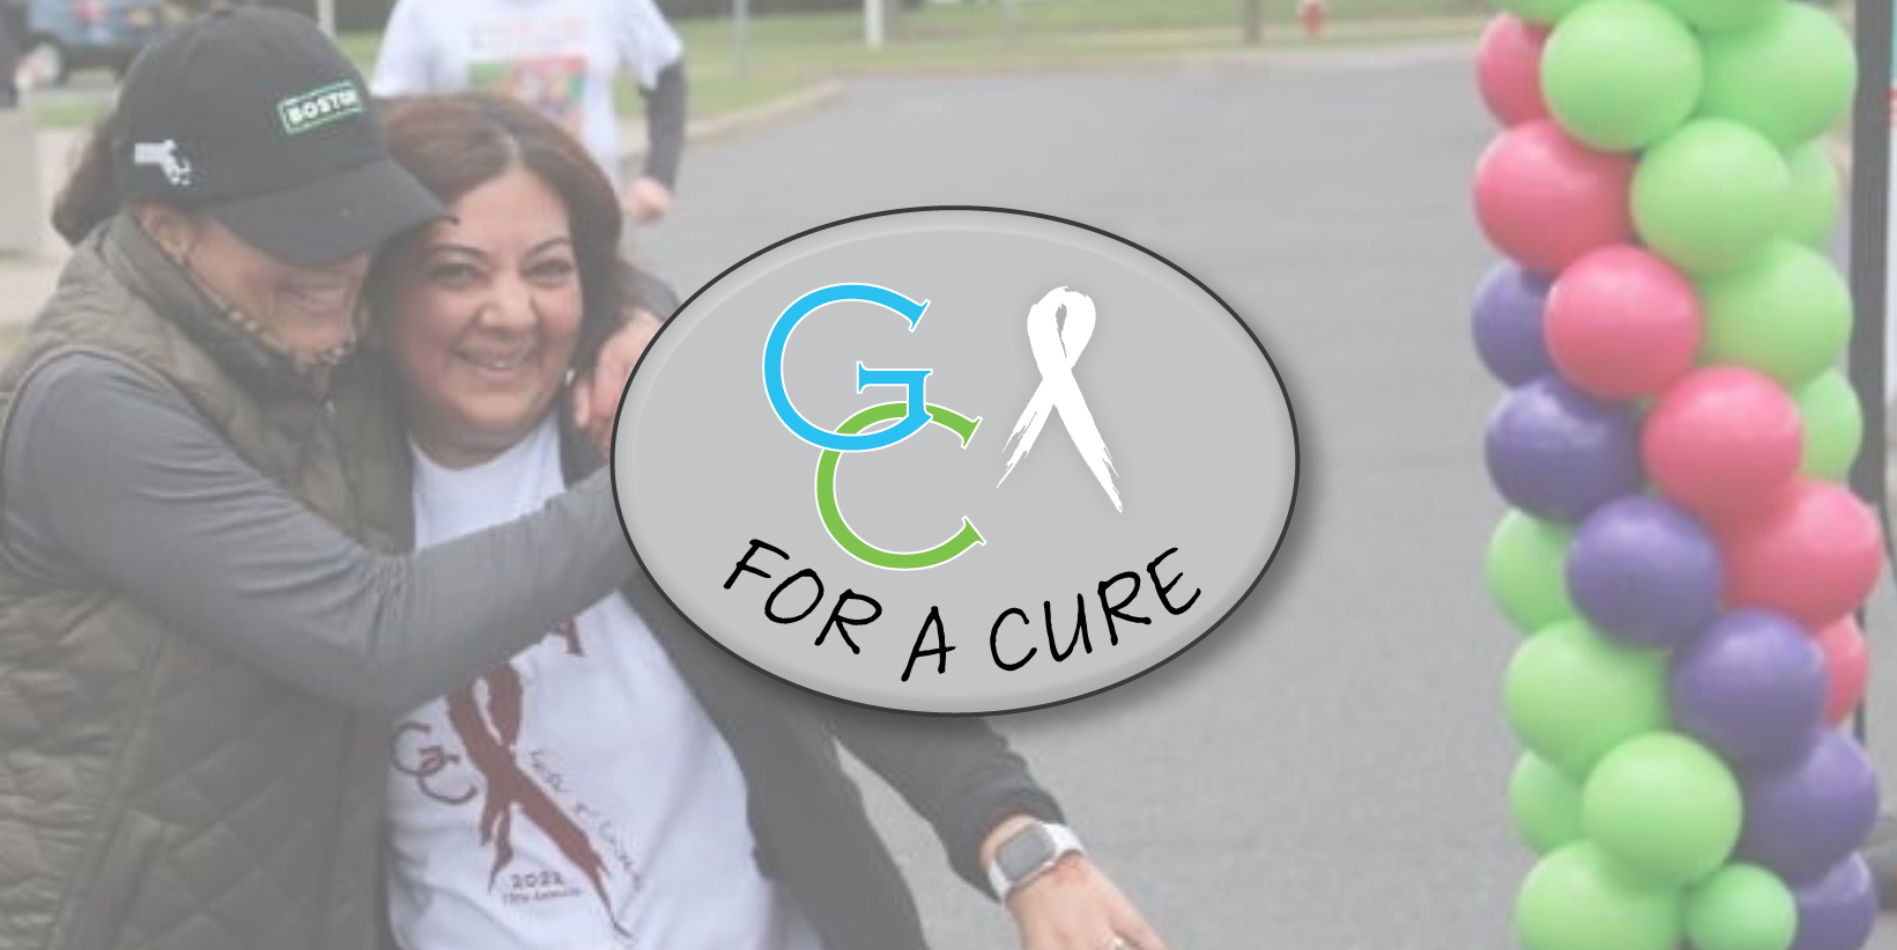 GC for a Cure 5K Run/Walk (Long Island Network) promotional image